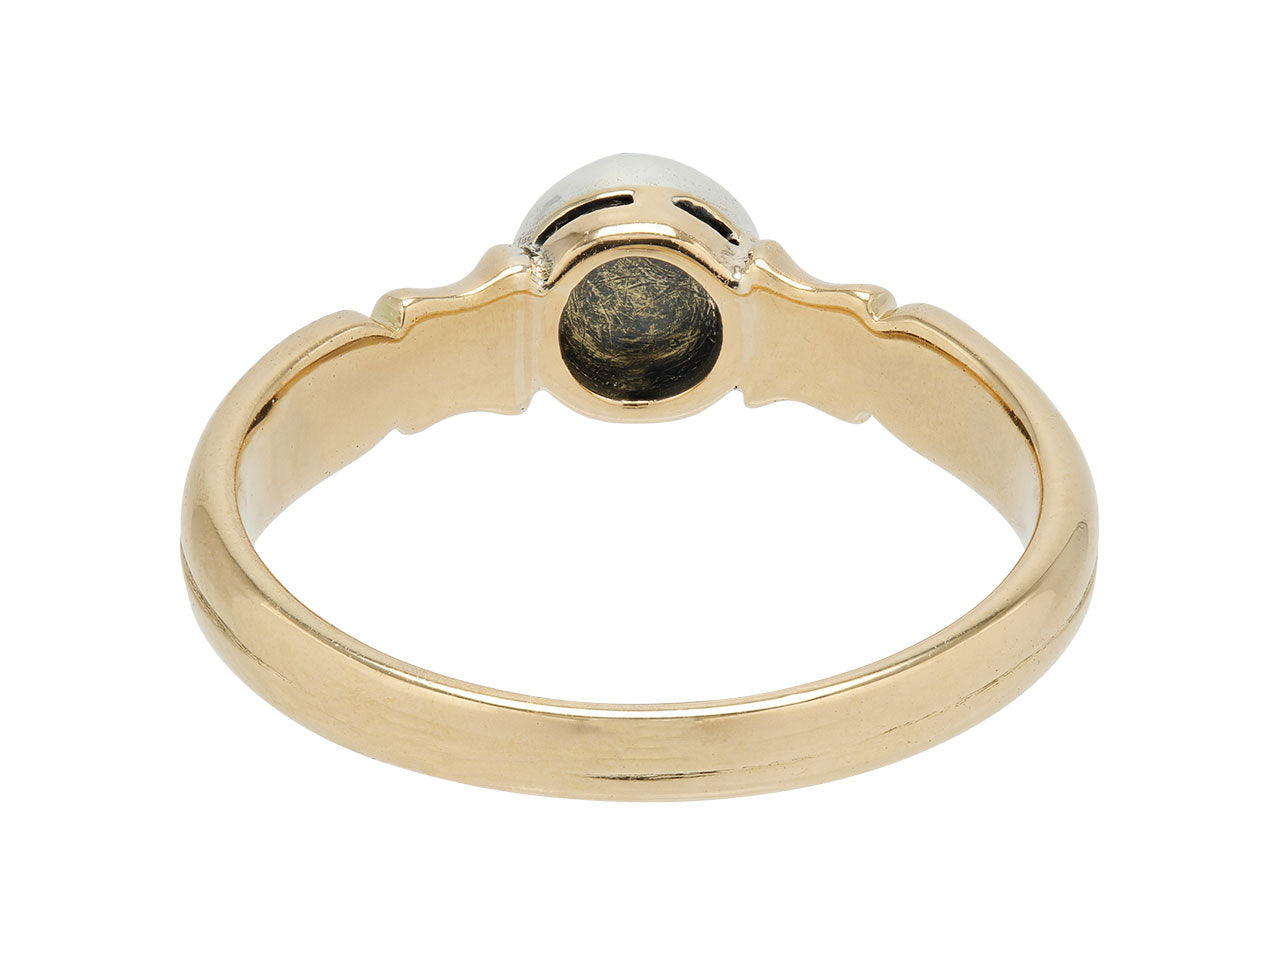 Antique Diamond Ring in 14K Gold and Silver